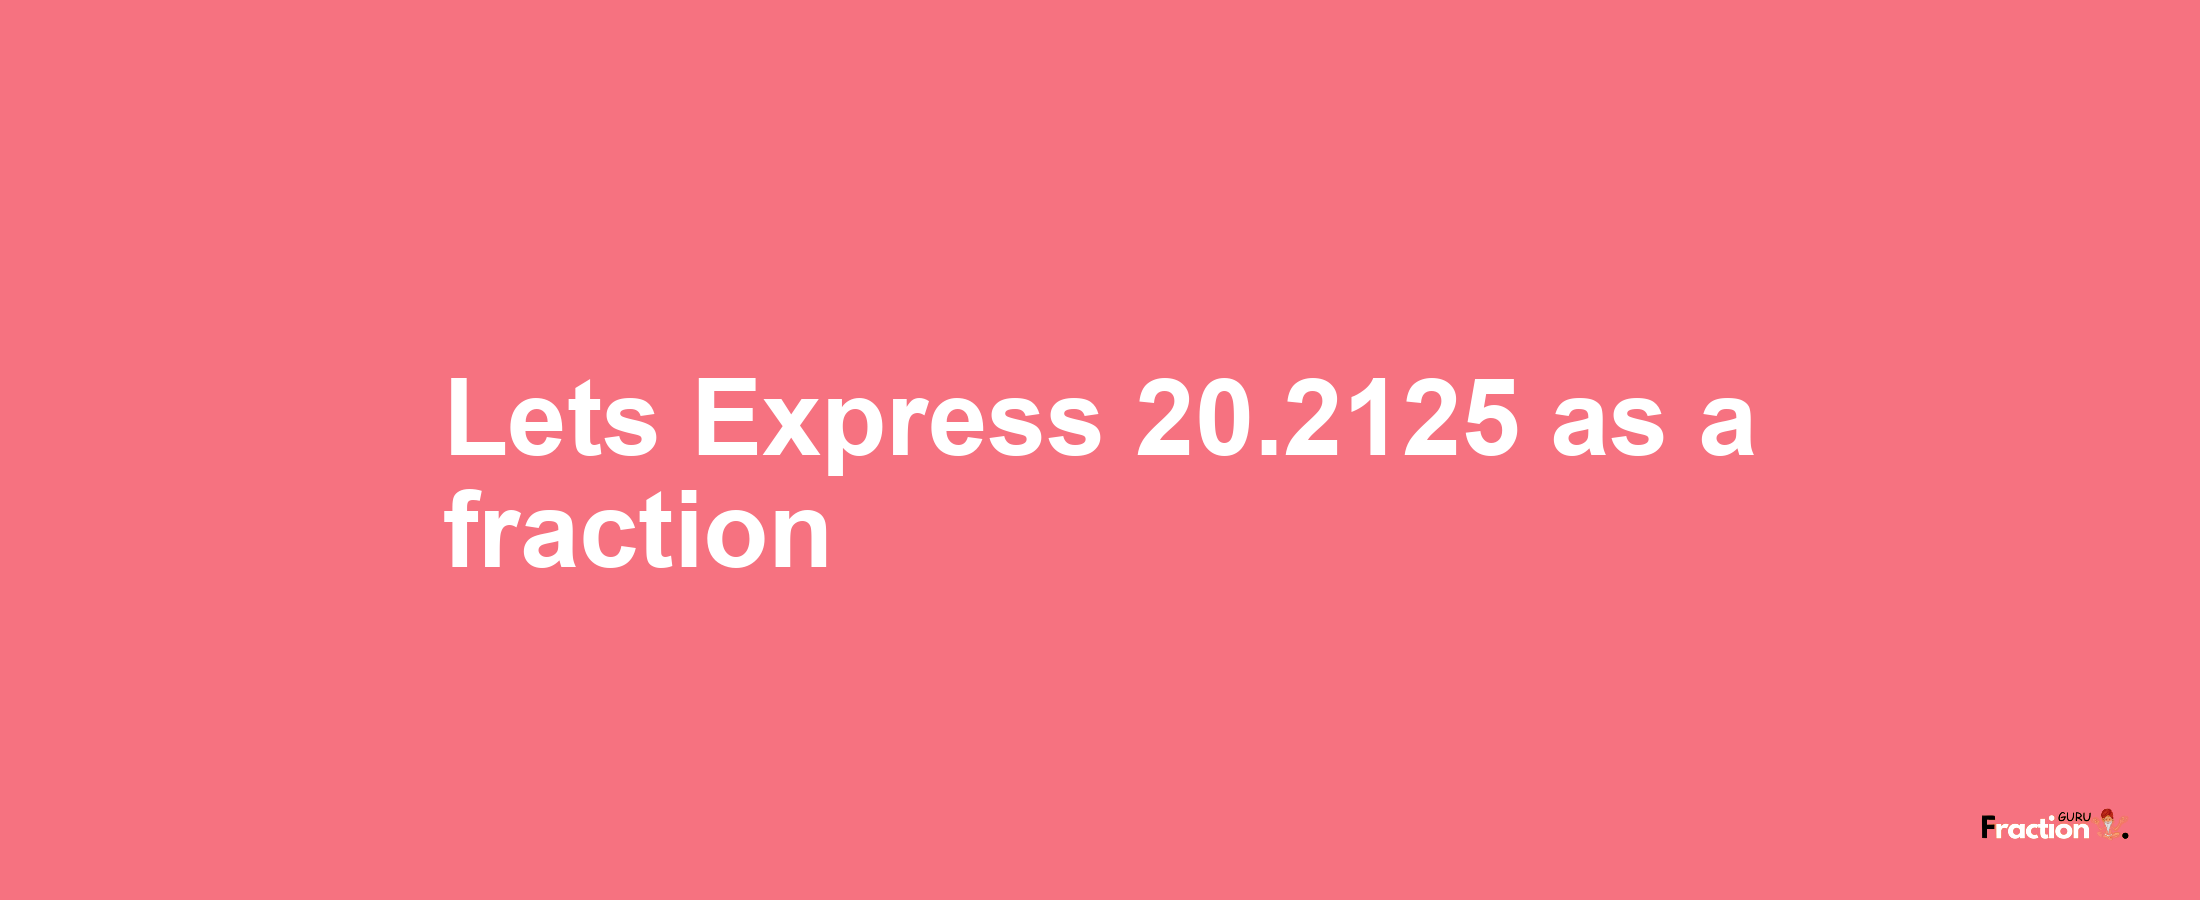 Lets Express 20.2125 as afraction